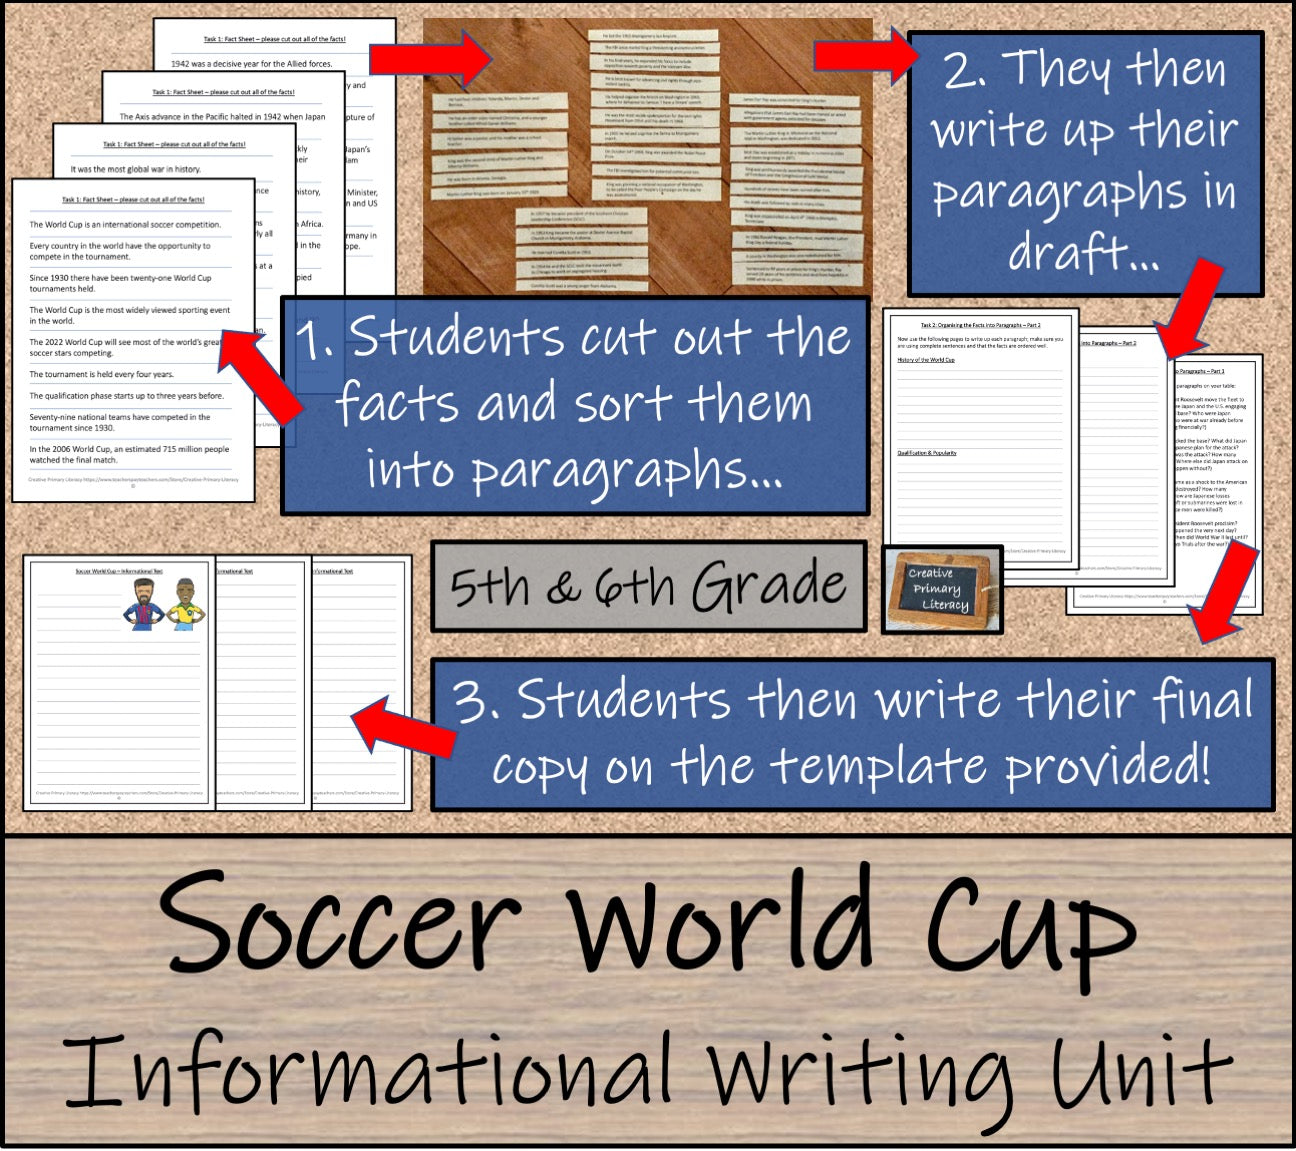 Soccer World Cup Informational Writing Unit | 5th Grade & 6th Grade